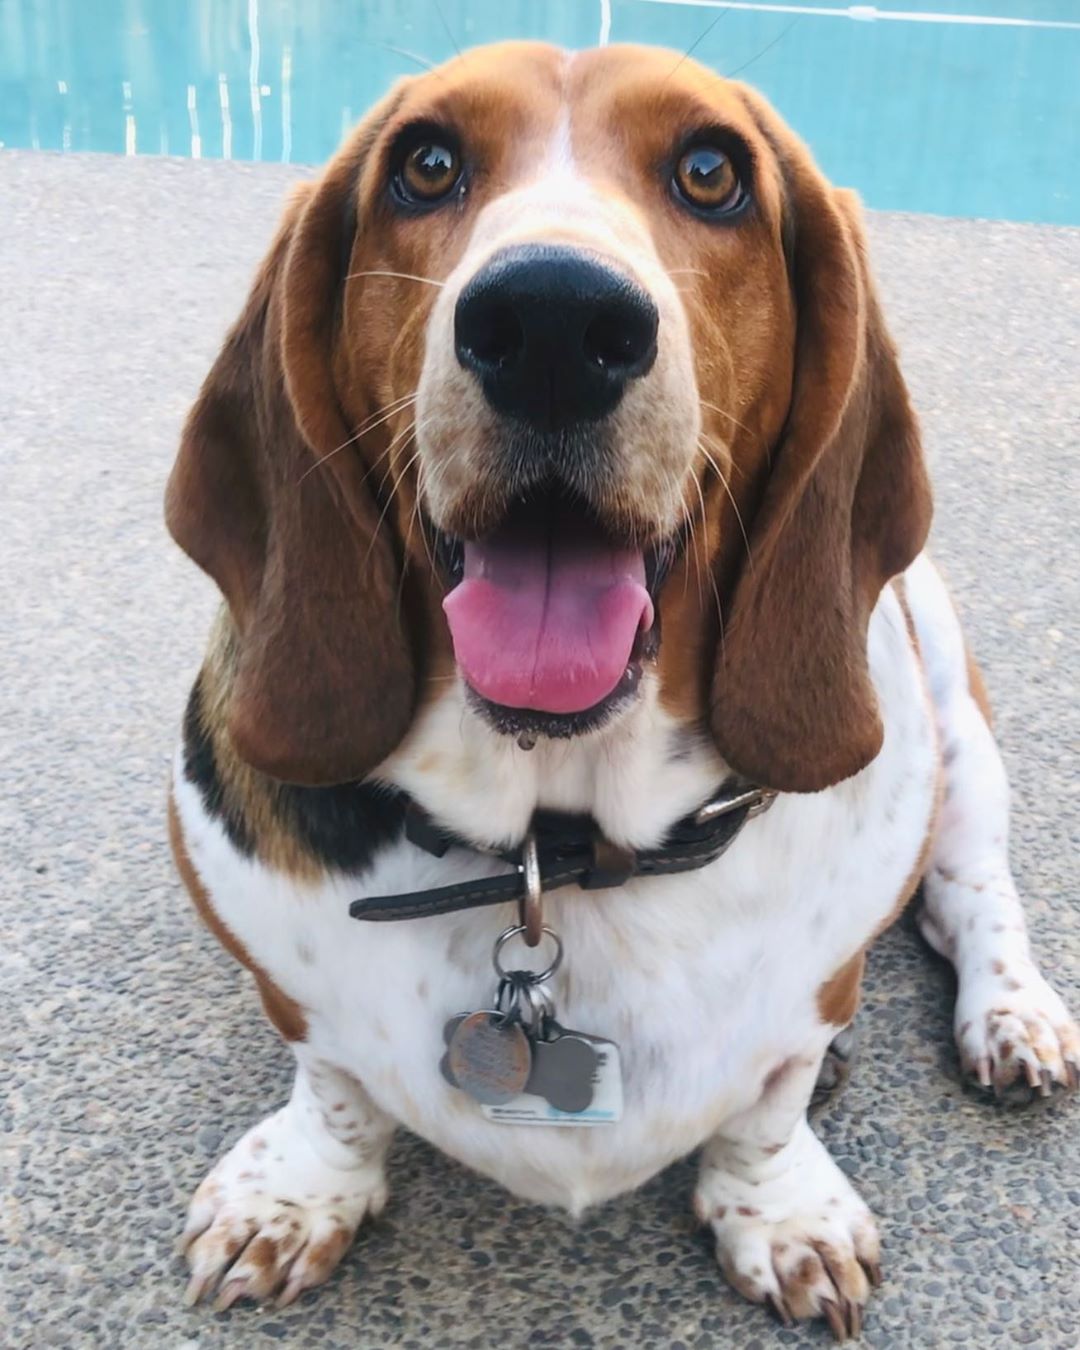 A Basset Hound sitting on the pool side while looking up and smiling